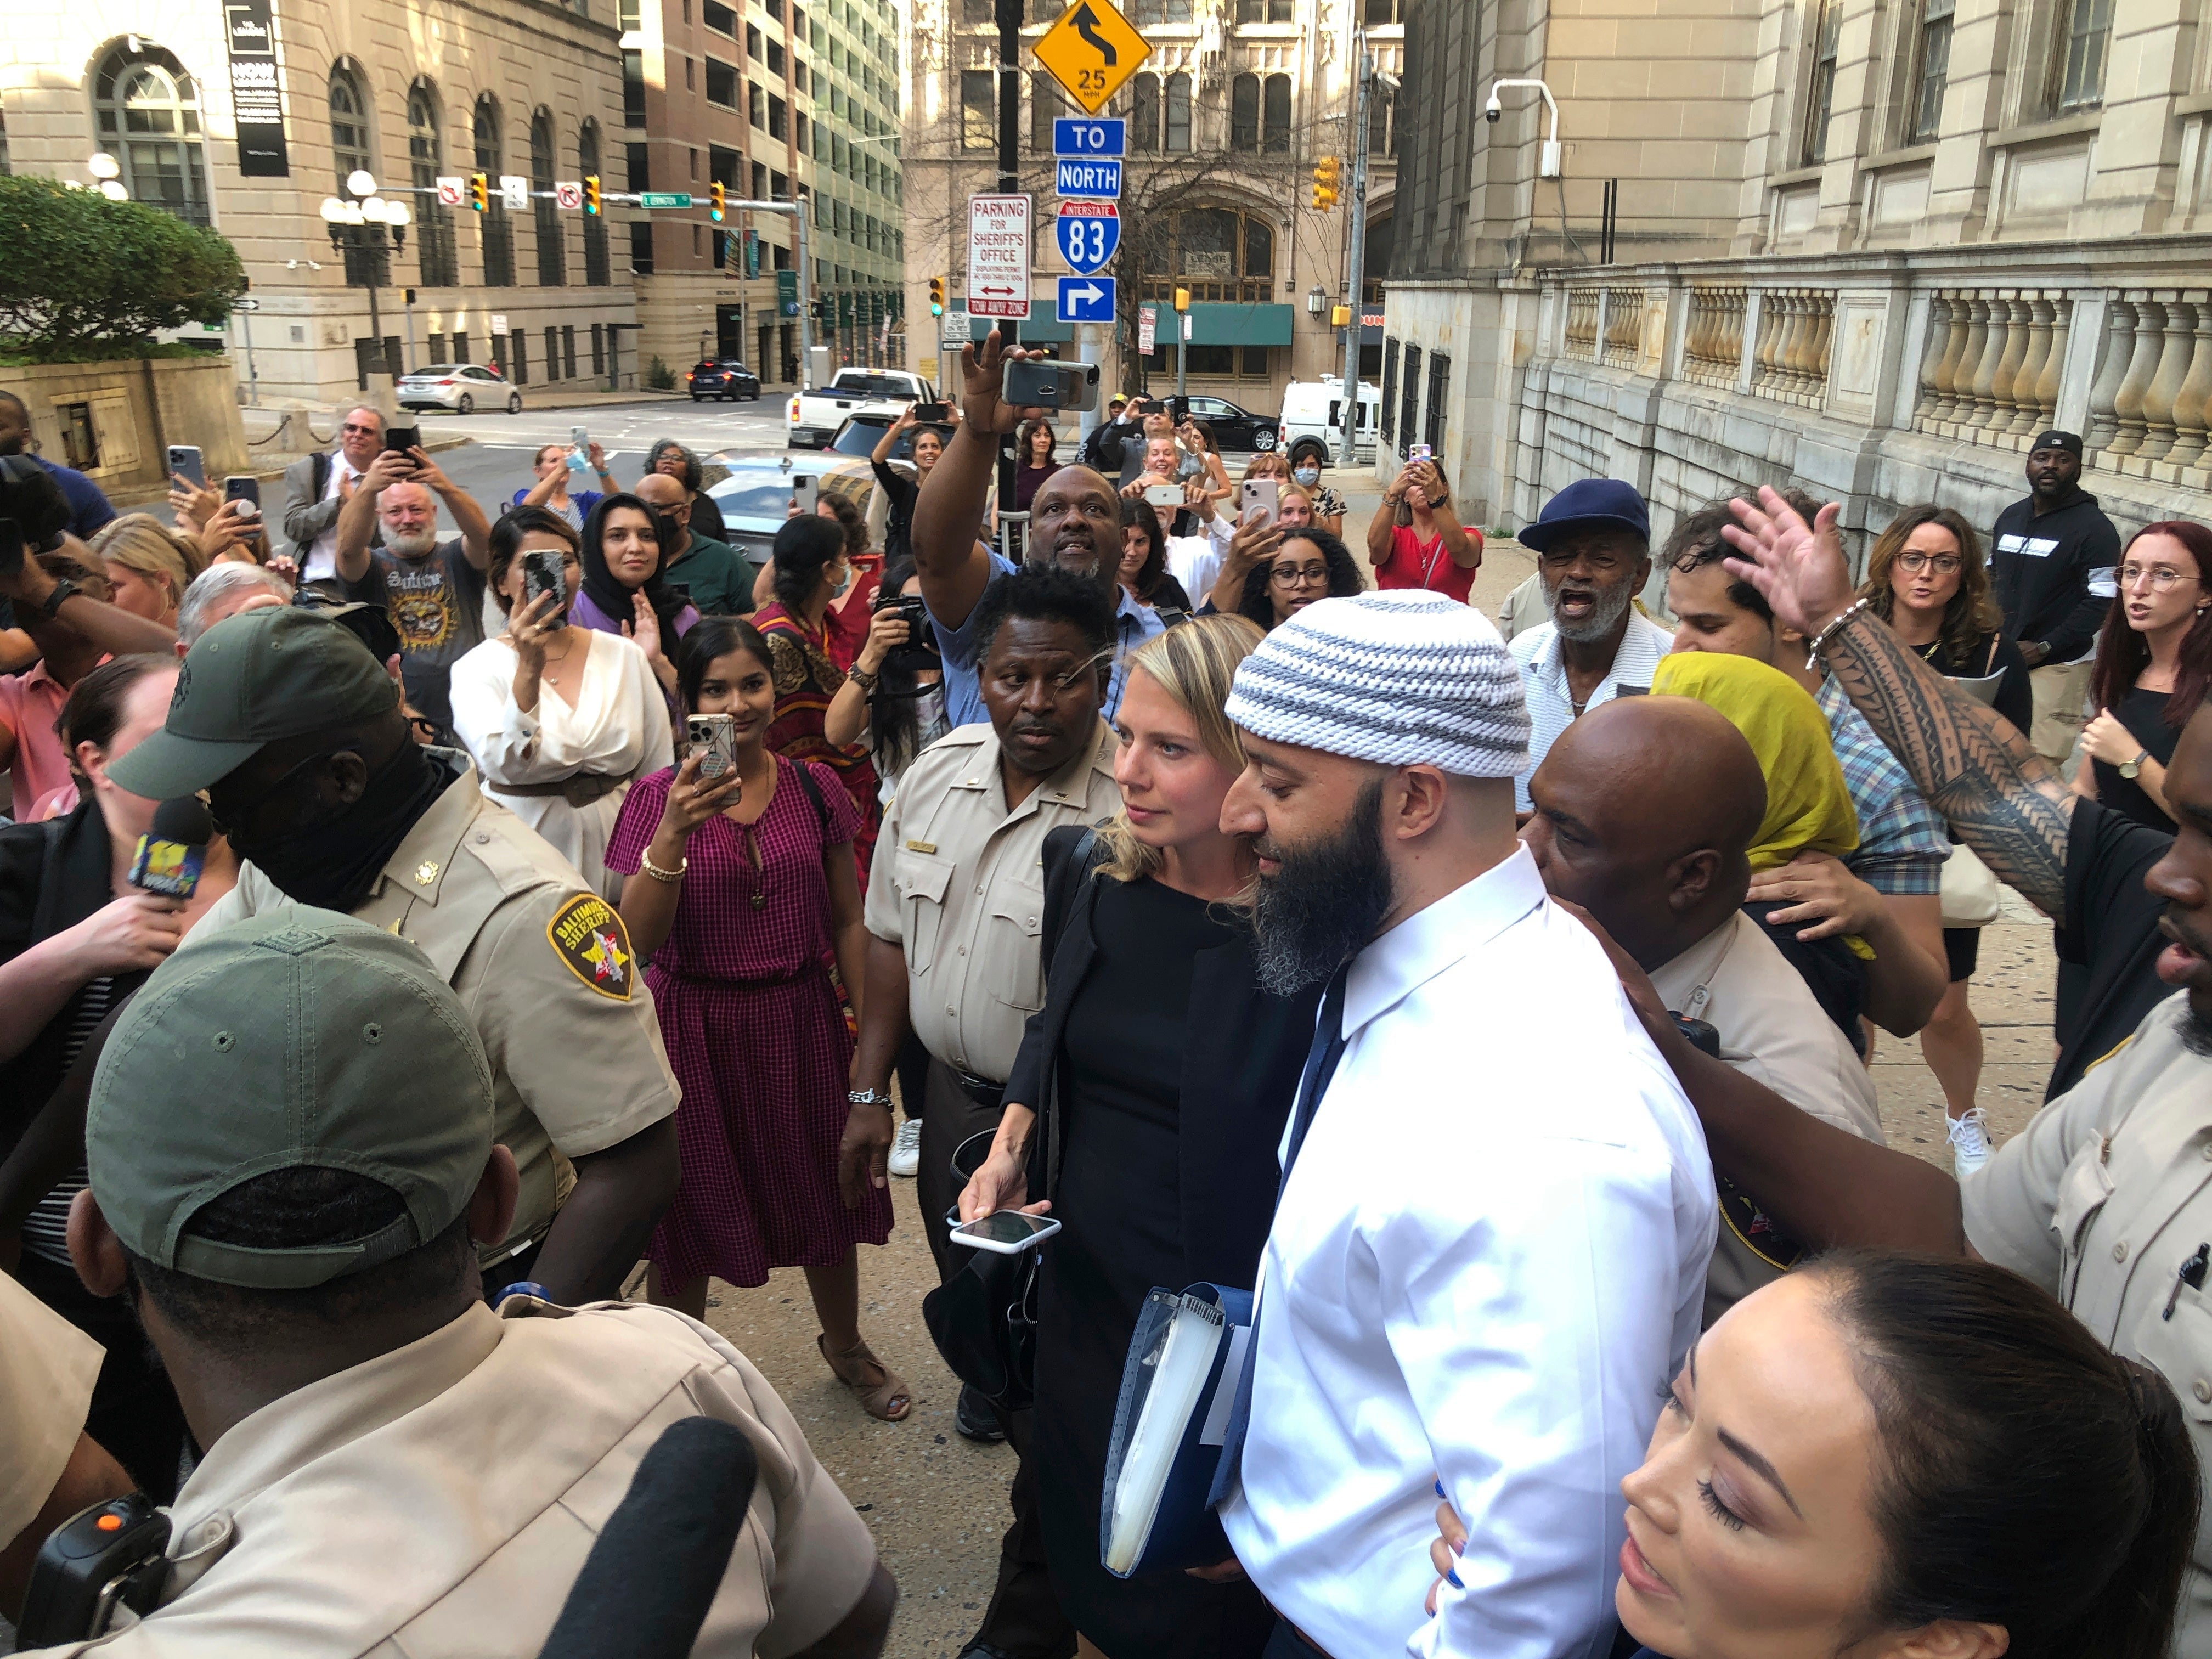 Adnan Syed leaves the courthouse on Monday